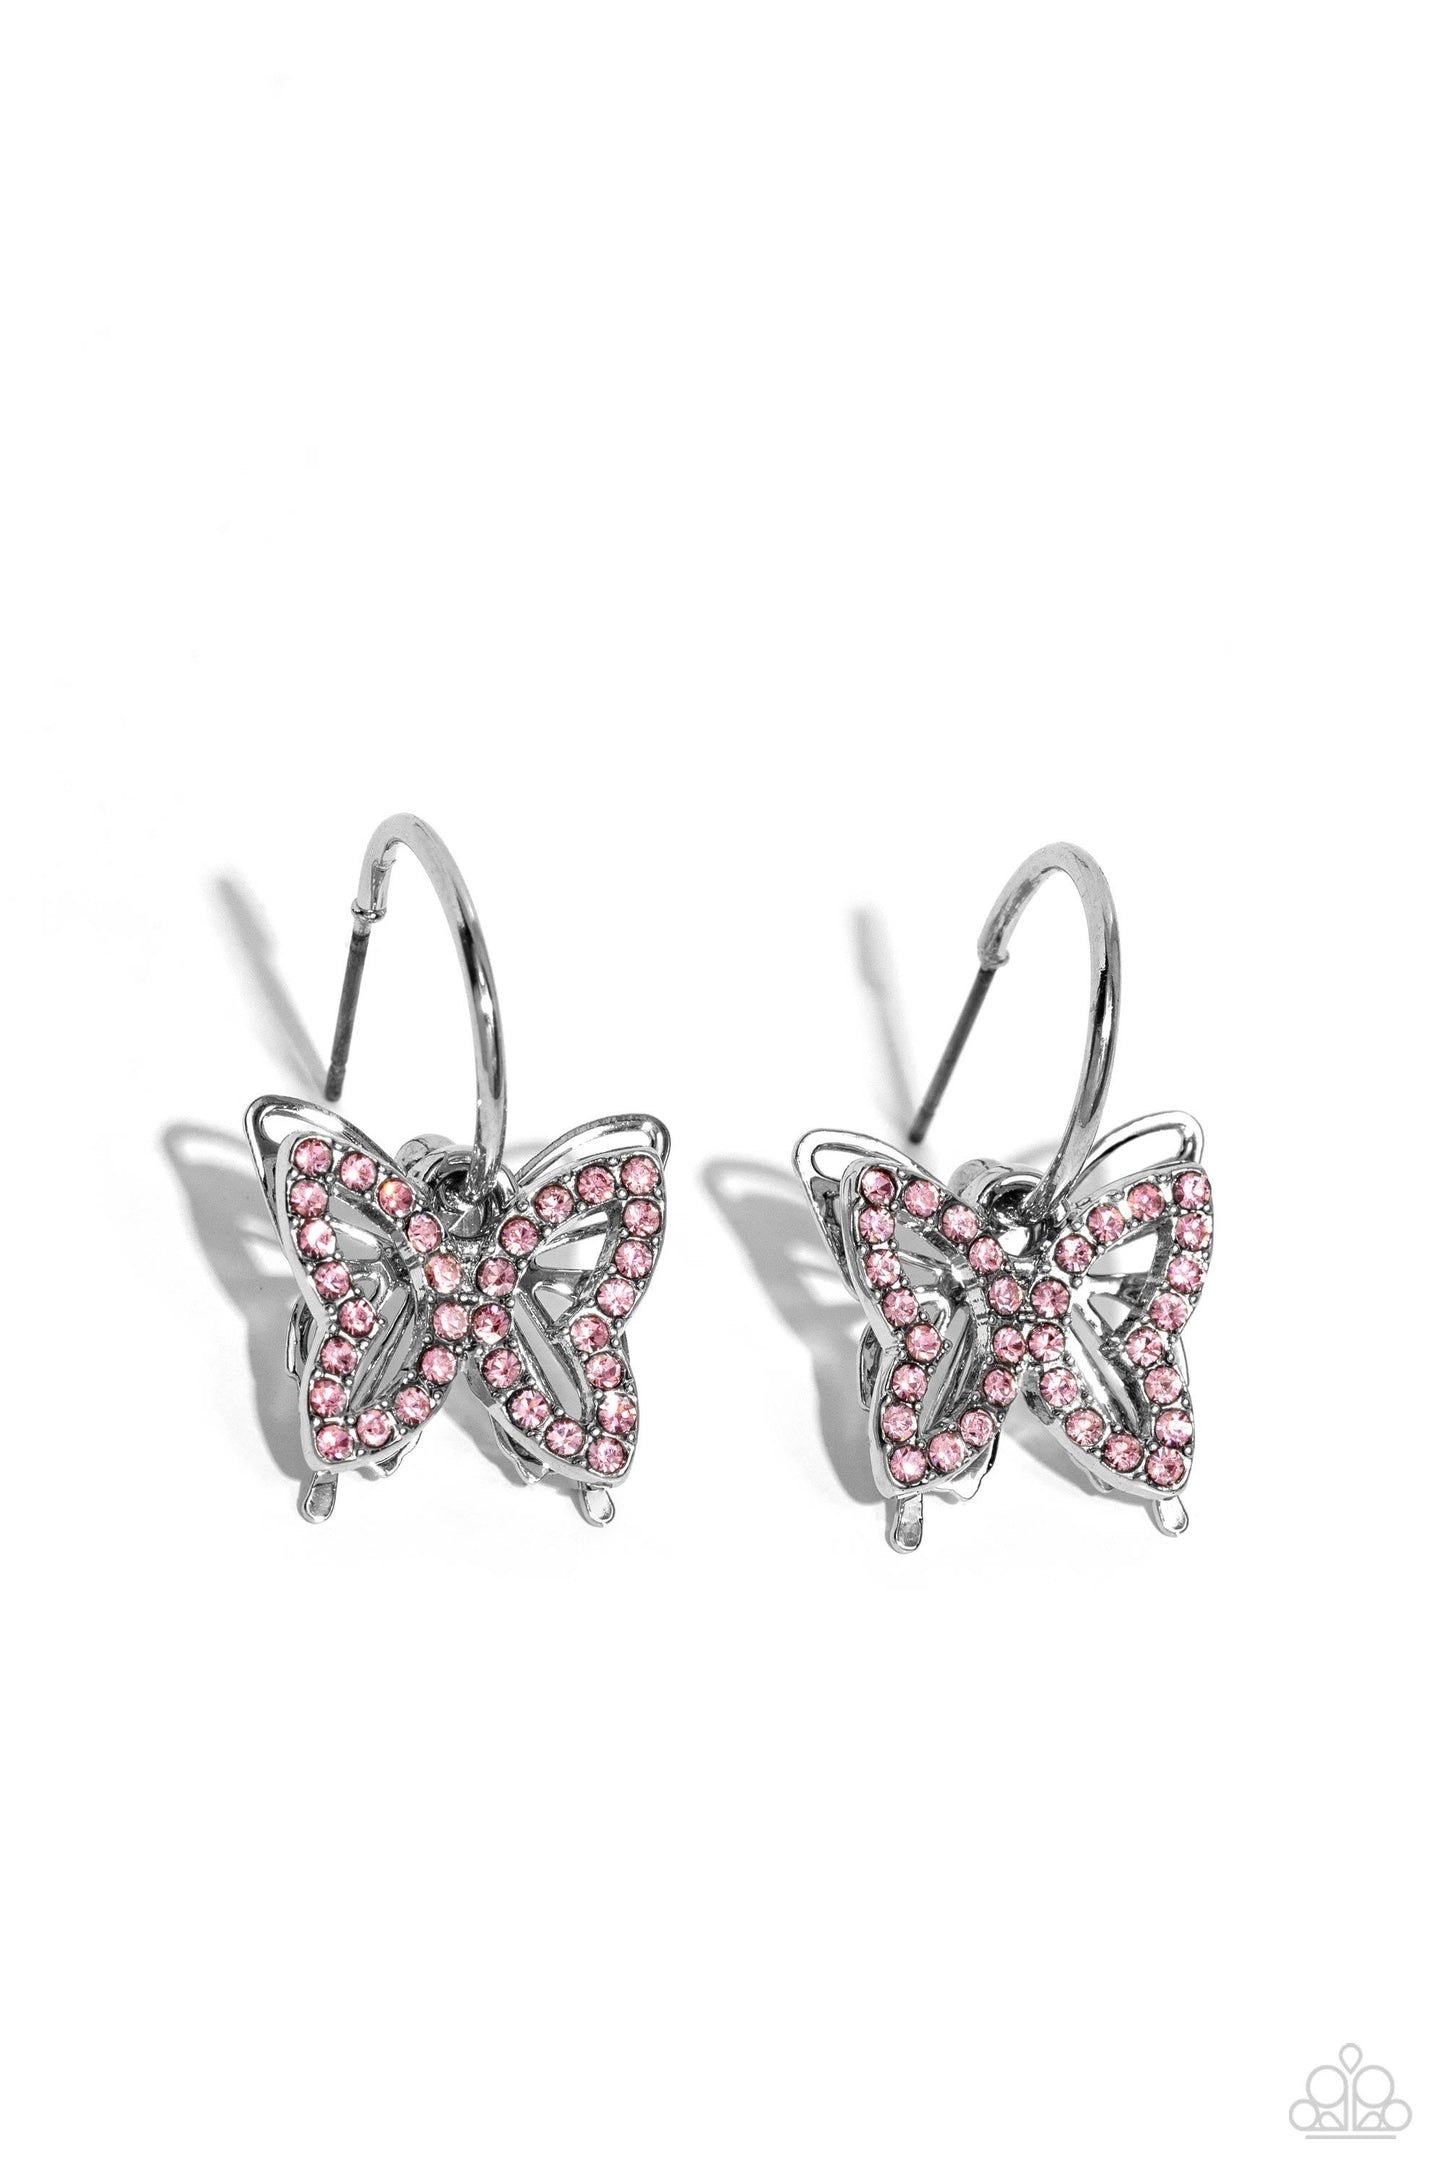 Paparazzi Accessories - Lyrical Layers - Pink Earrings - Bling by JessieK